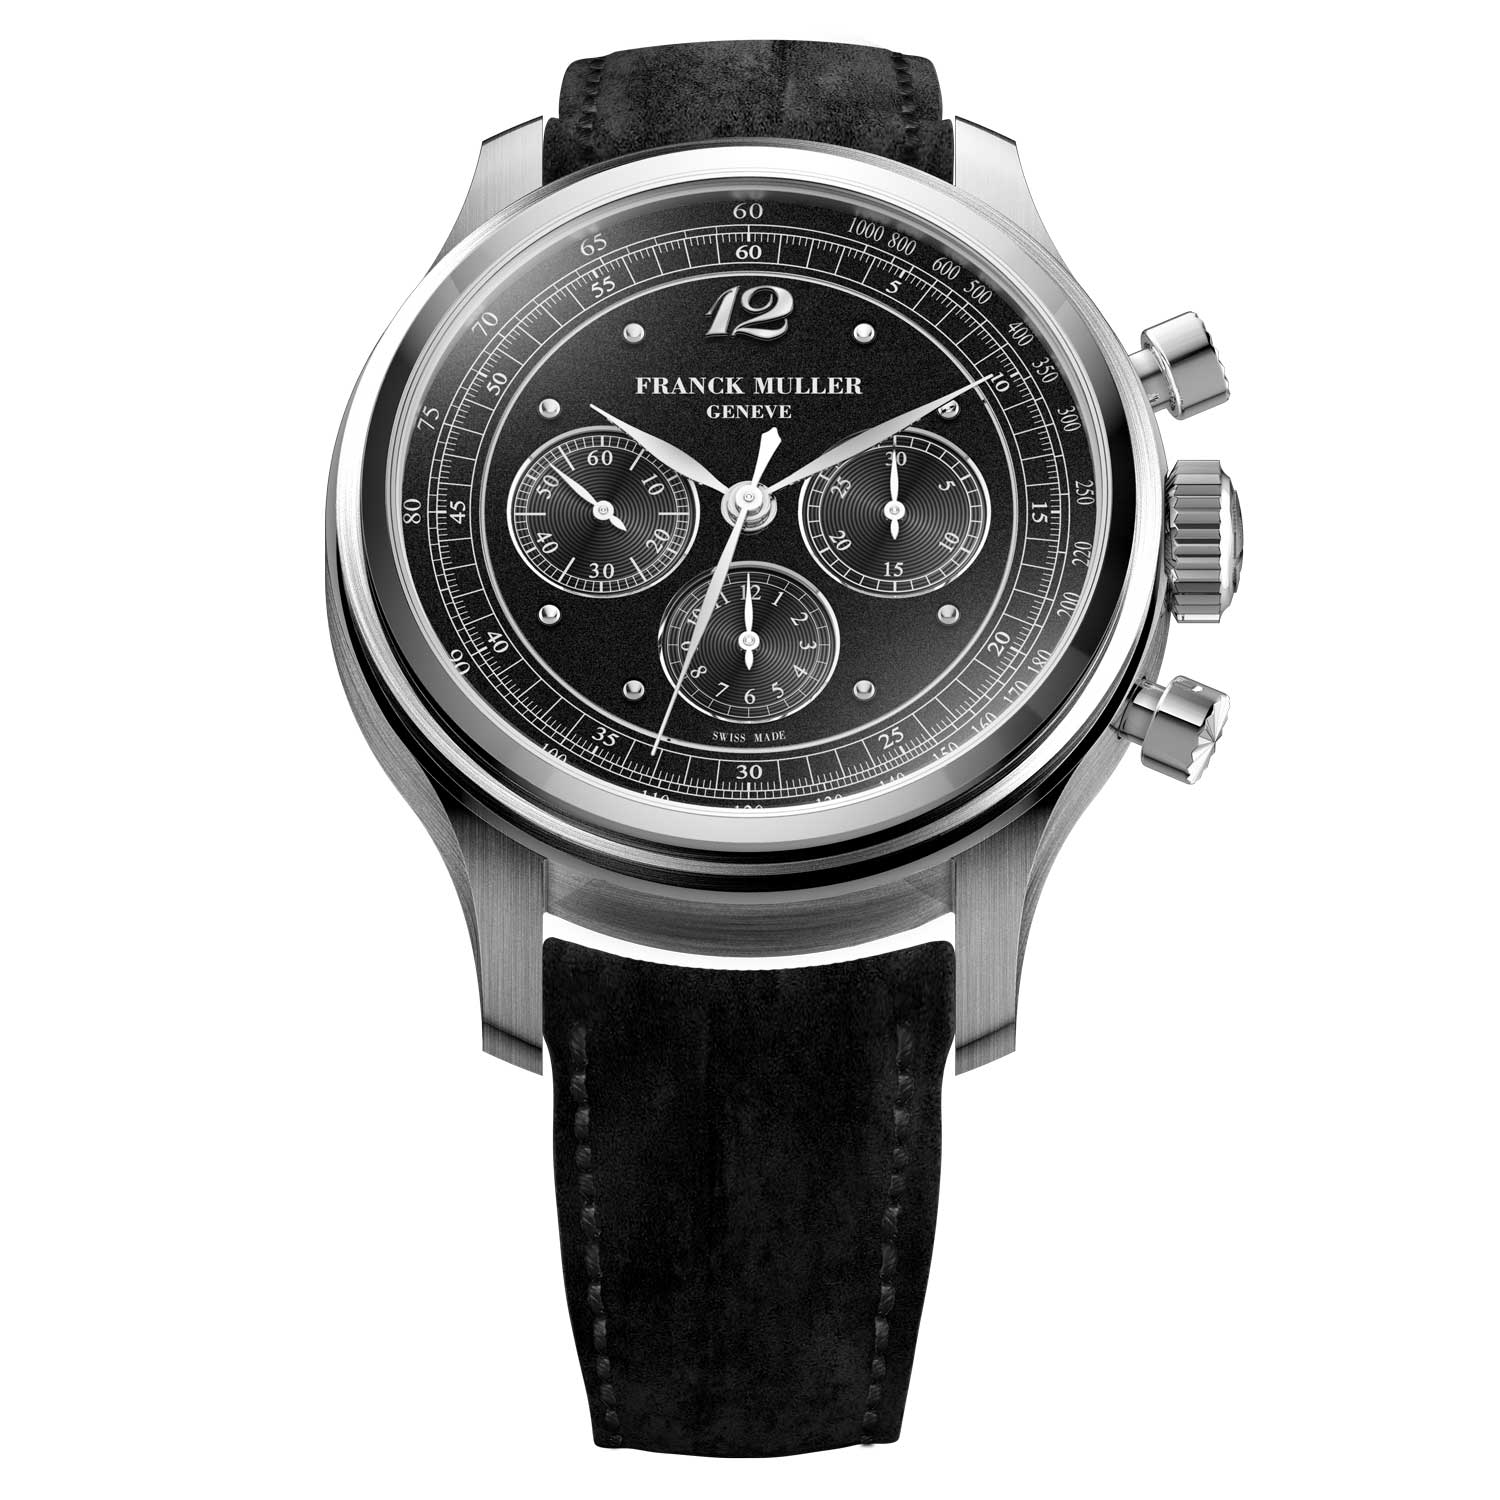 Franck Muller 30th Anniversary Limited Edition Tri-Compax Chronograph, Ref END 39 CC 3 Black Grail Watch BR